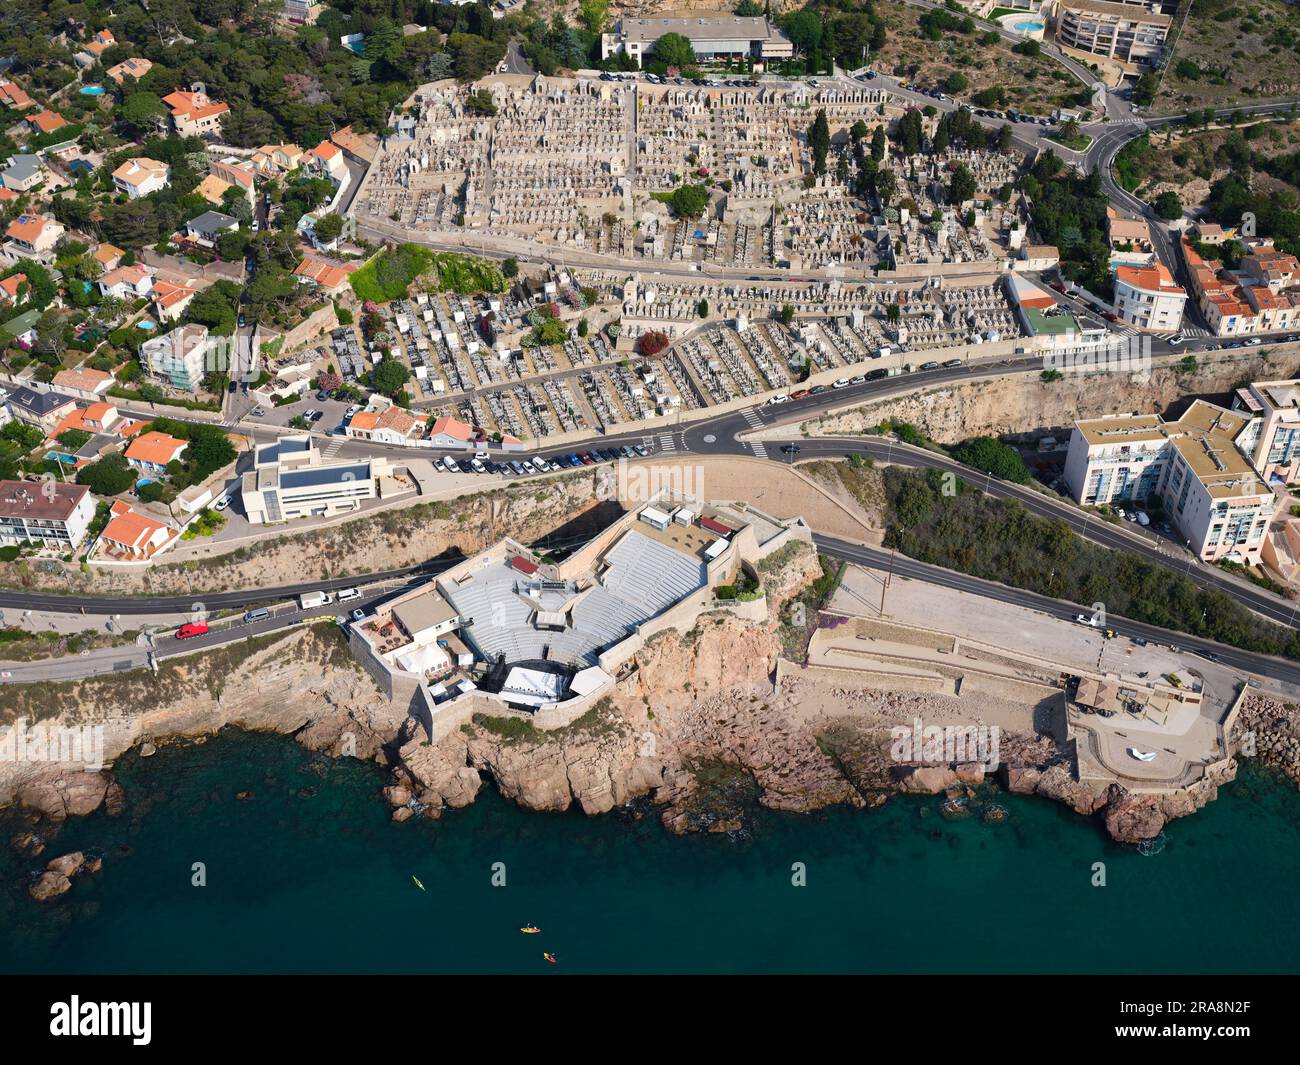 AERIAL VIEW. Cimetière Marin of Sète overlooking the Theater of the Sea and the Mediterranean Sea. Sète, Hérault, Occitanie, France. Stock Photo